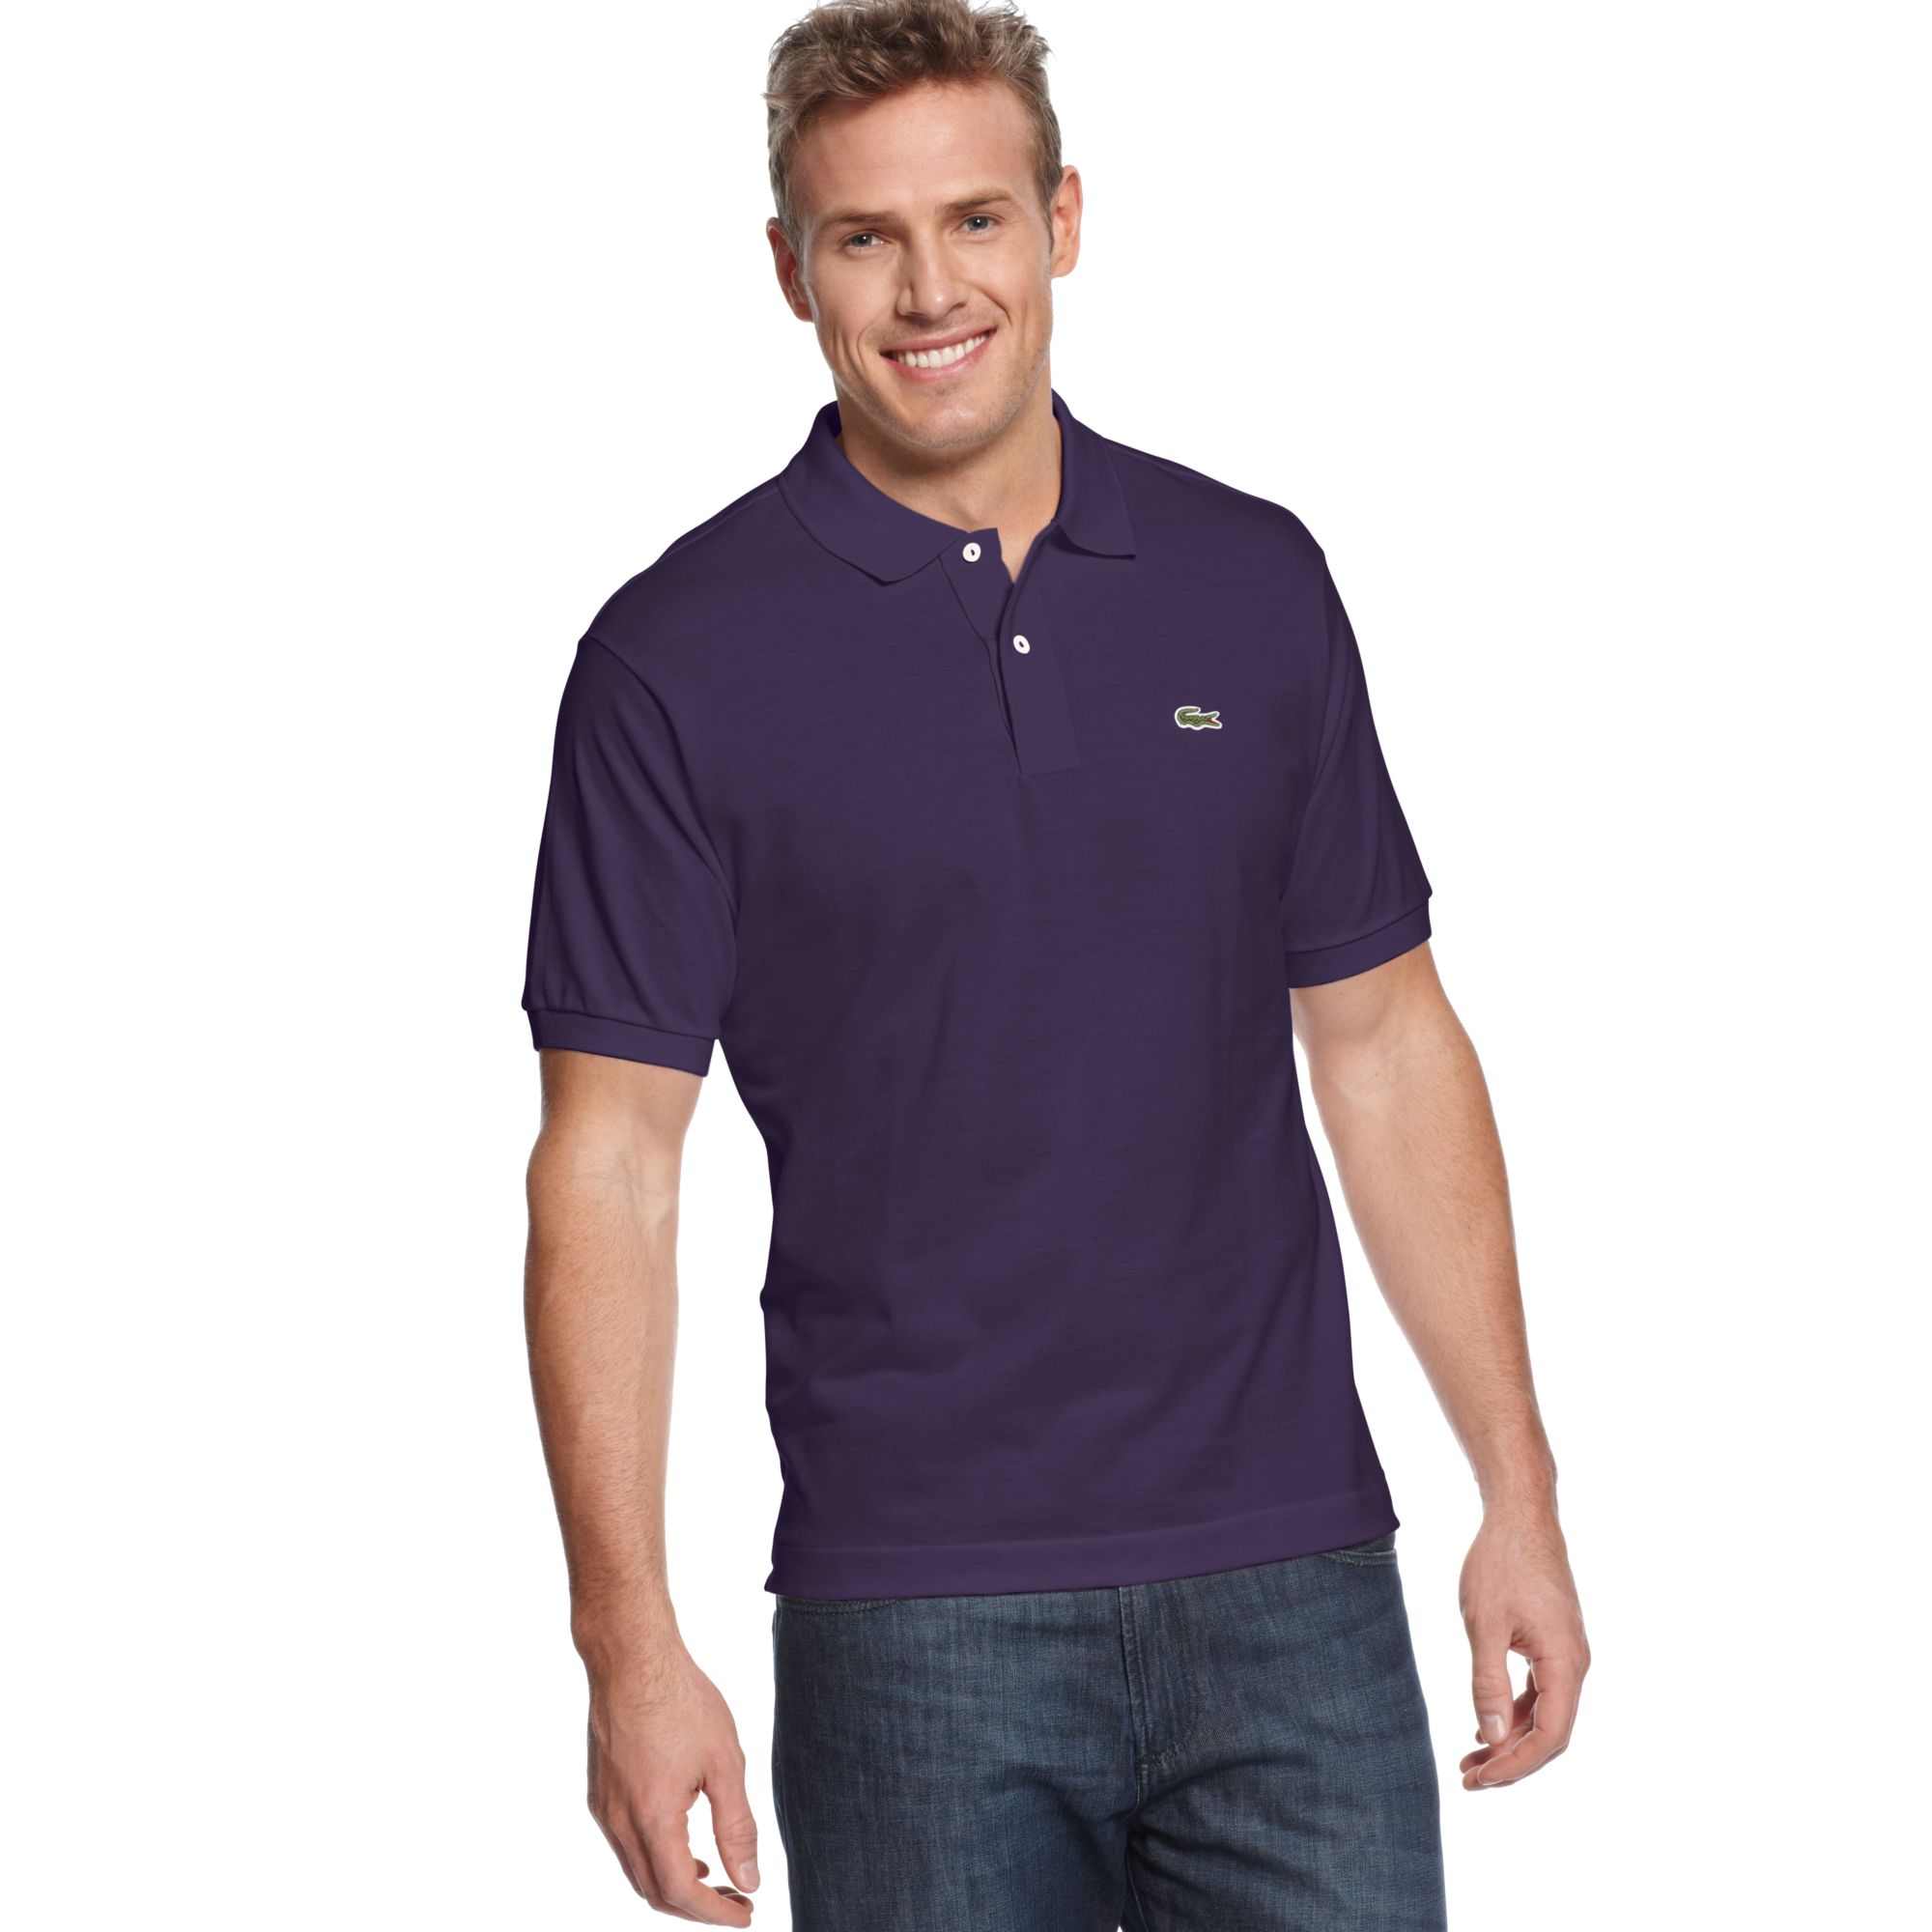 Lyst - Lacoste Classic Pique Polo Shirt in Purple for Men